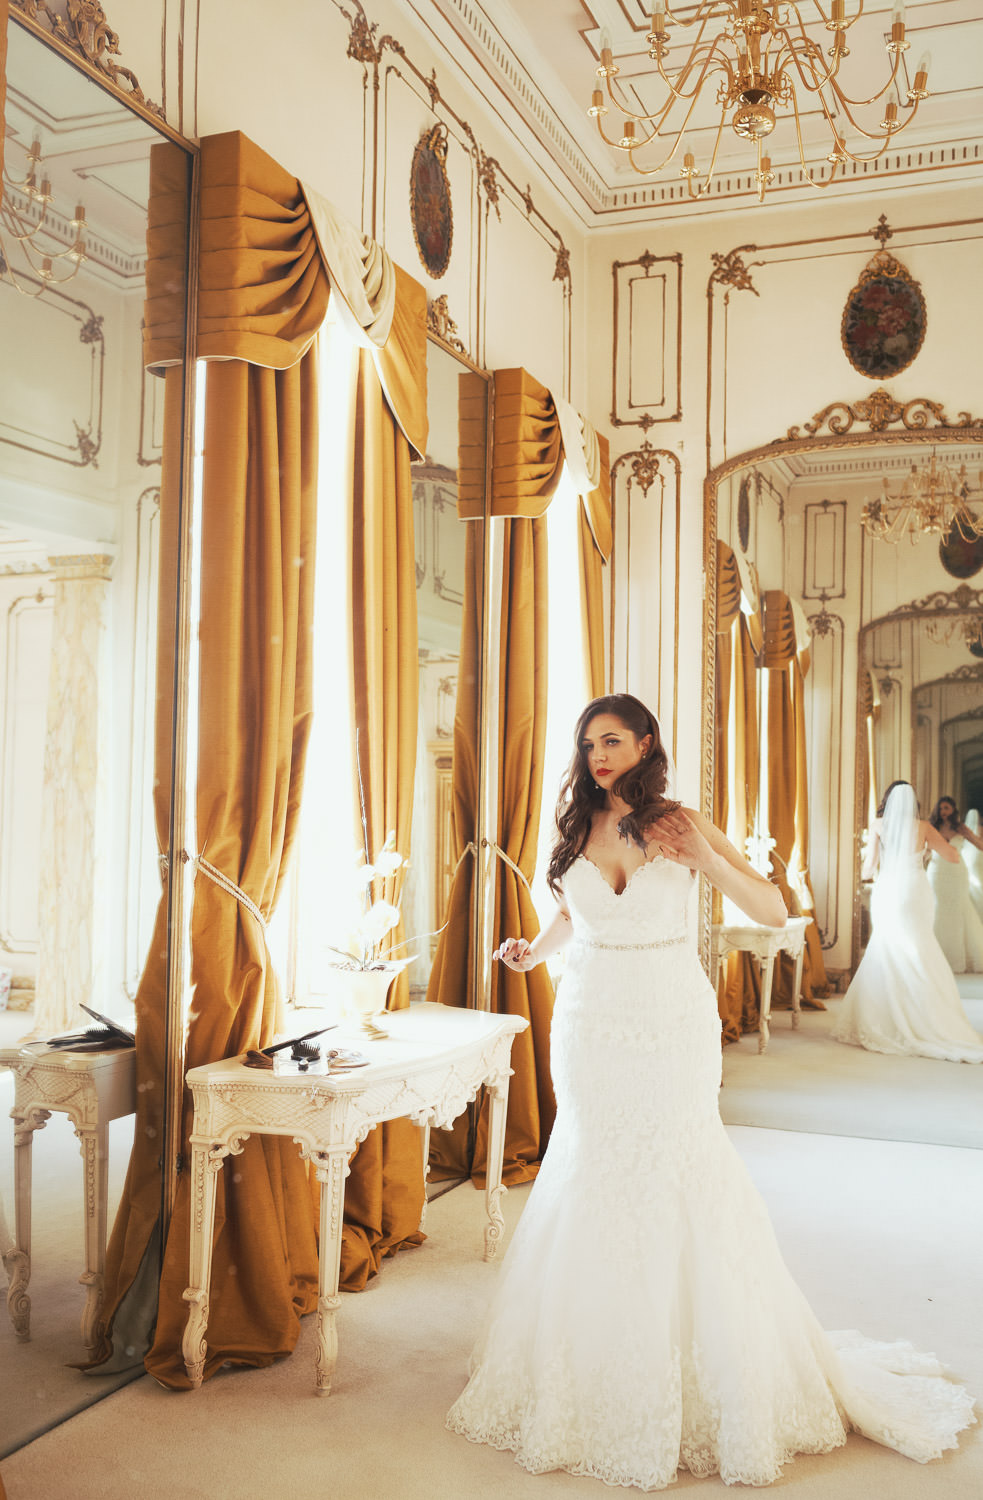 A bride in a long white dress adjusting her hair. Mirrors behind and in front of her. In the Rococo Bridal suite (Late Baroque) bridal room at Gosfield Hall.